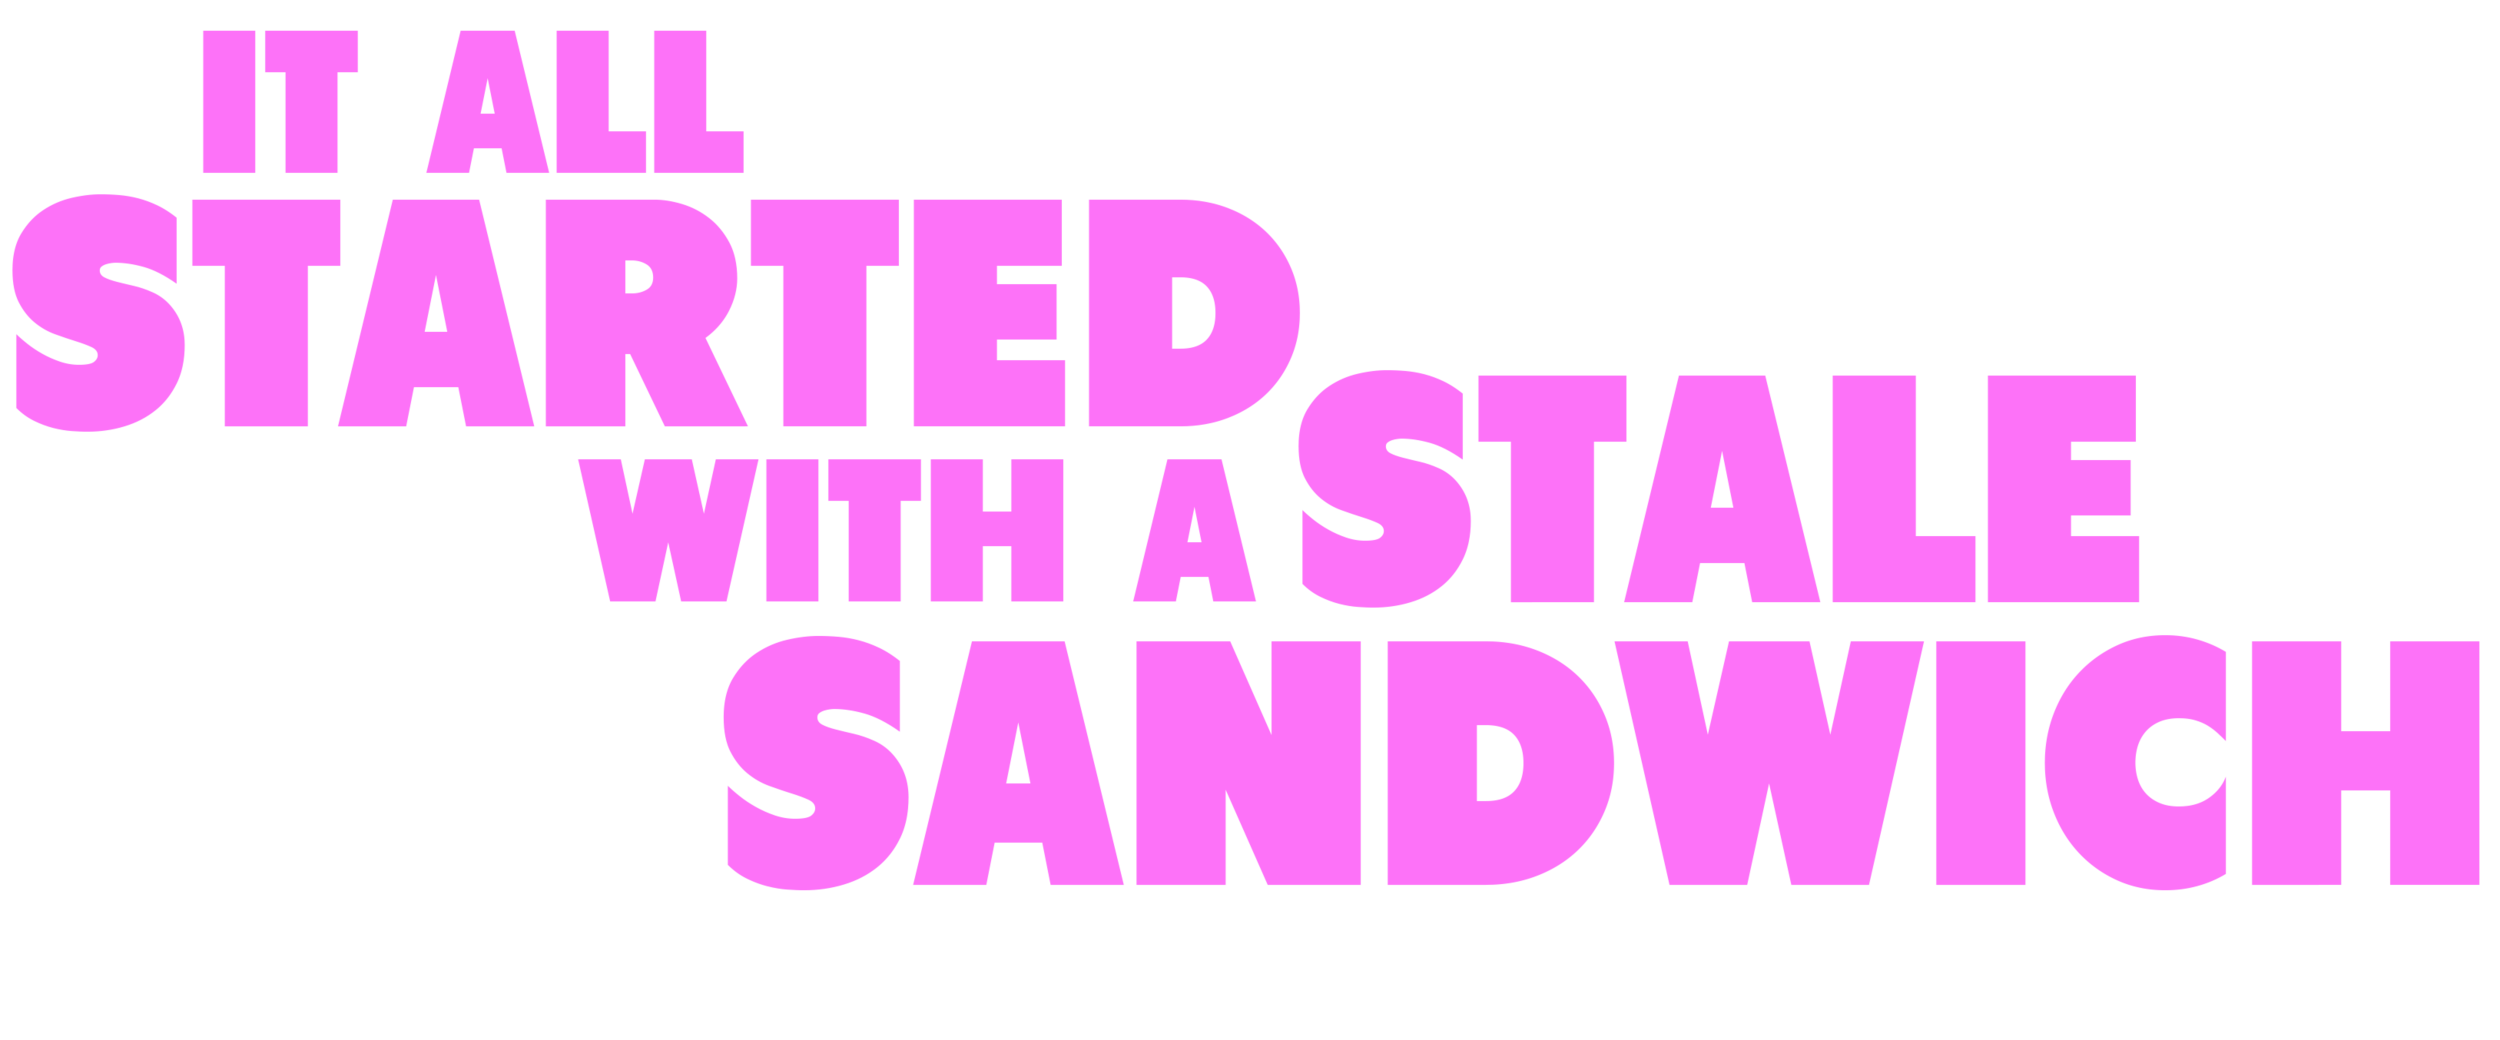 IT ALL STARTED WITH A STALE SANDWICH